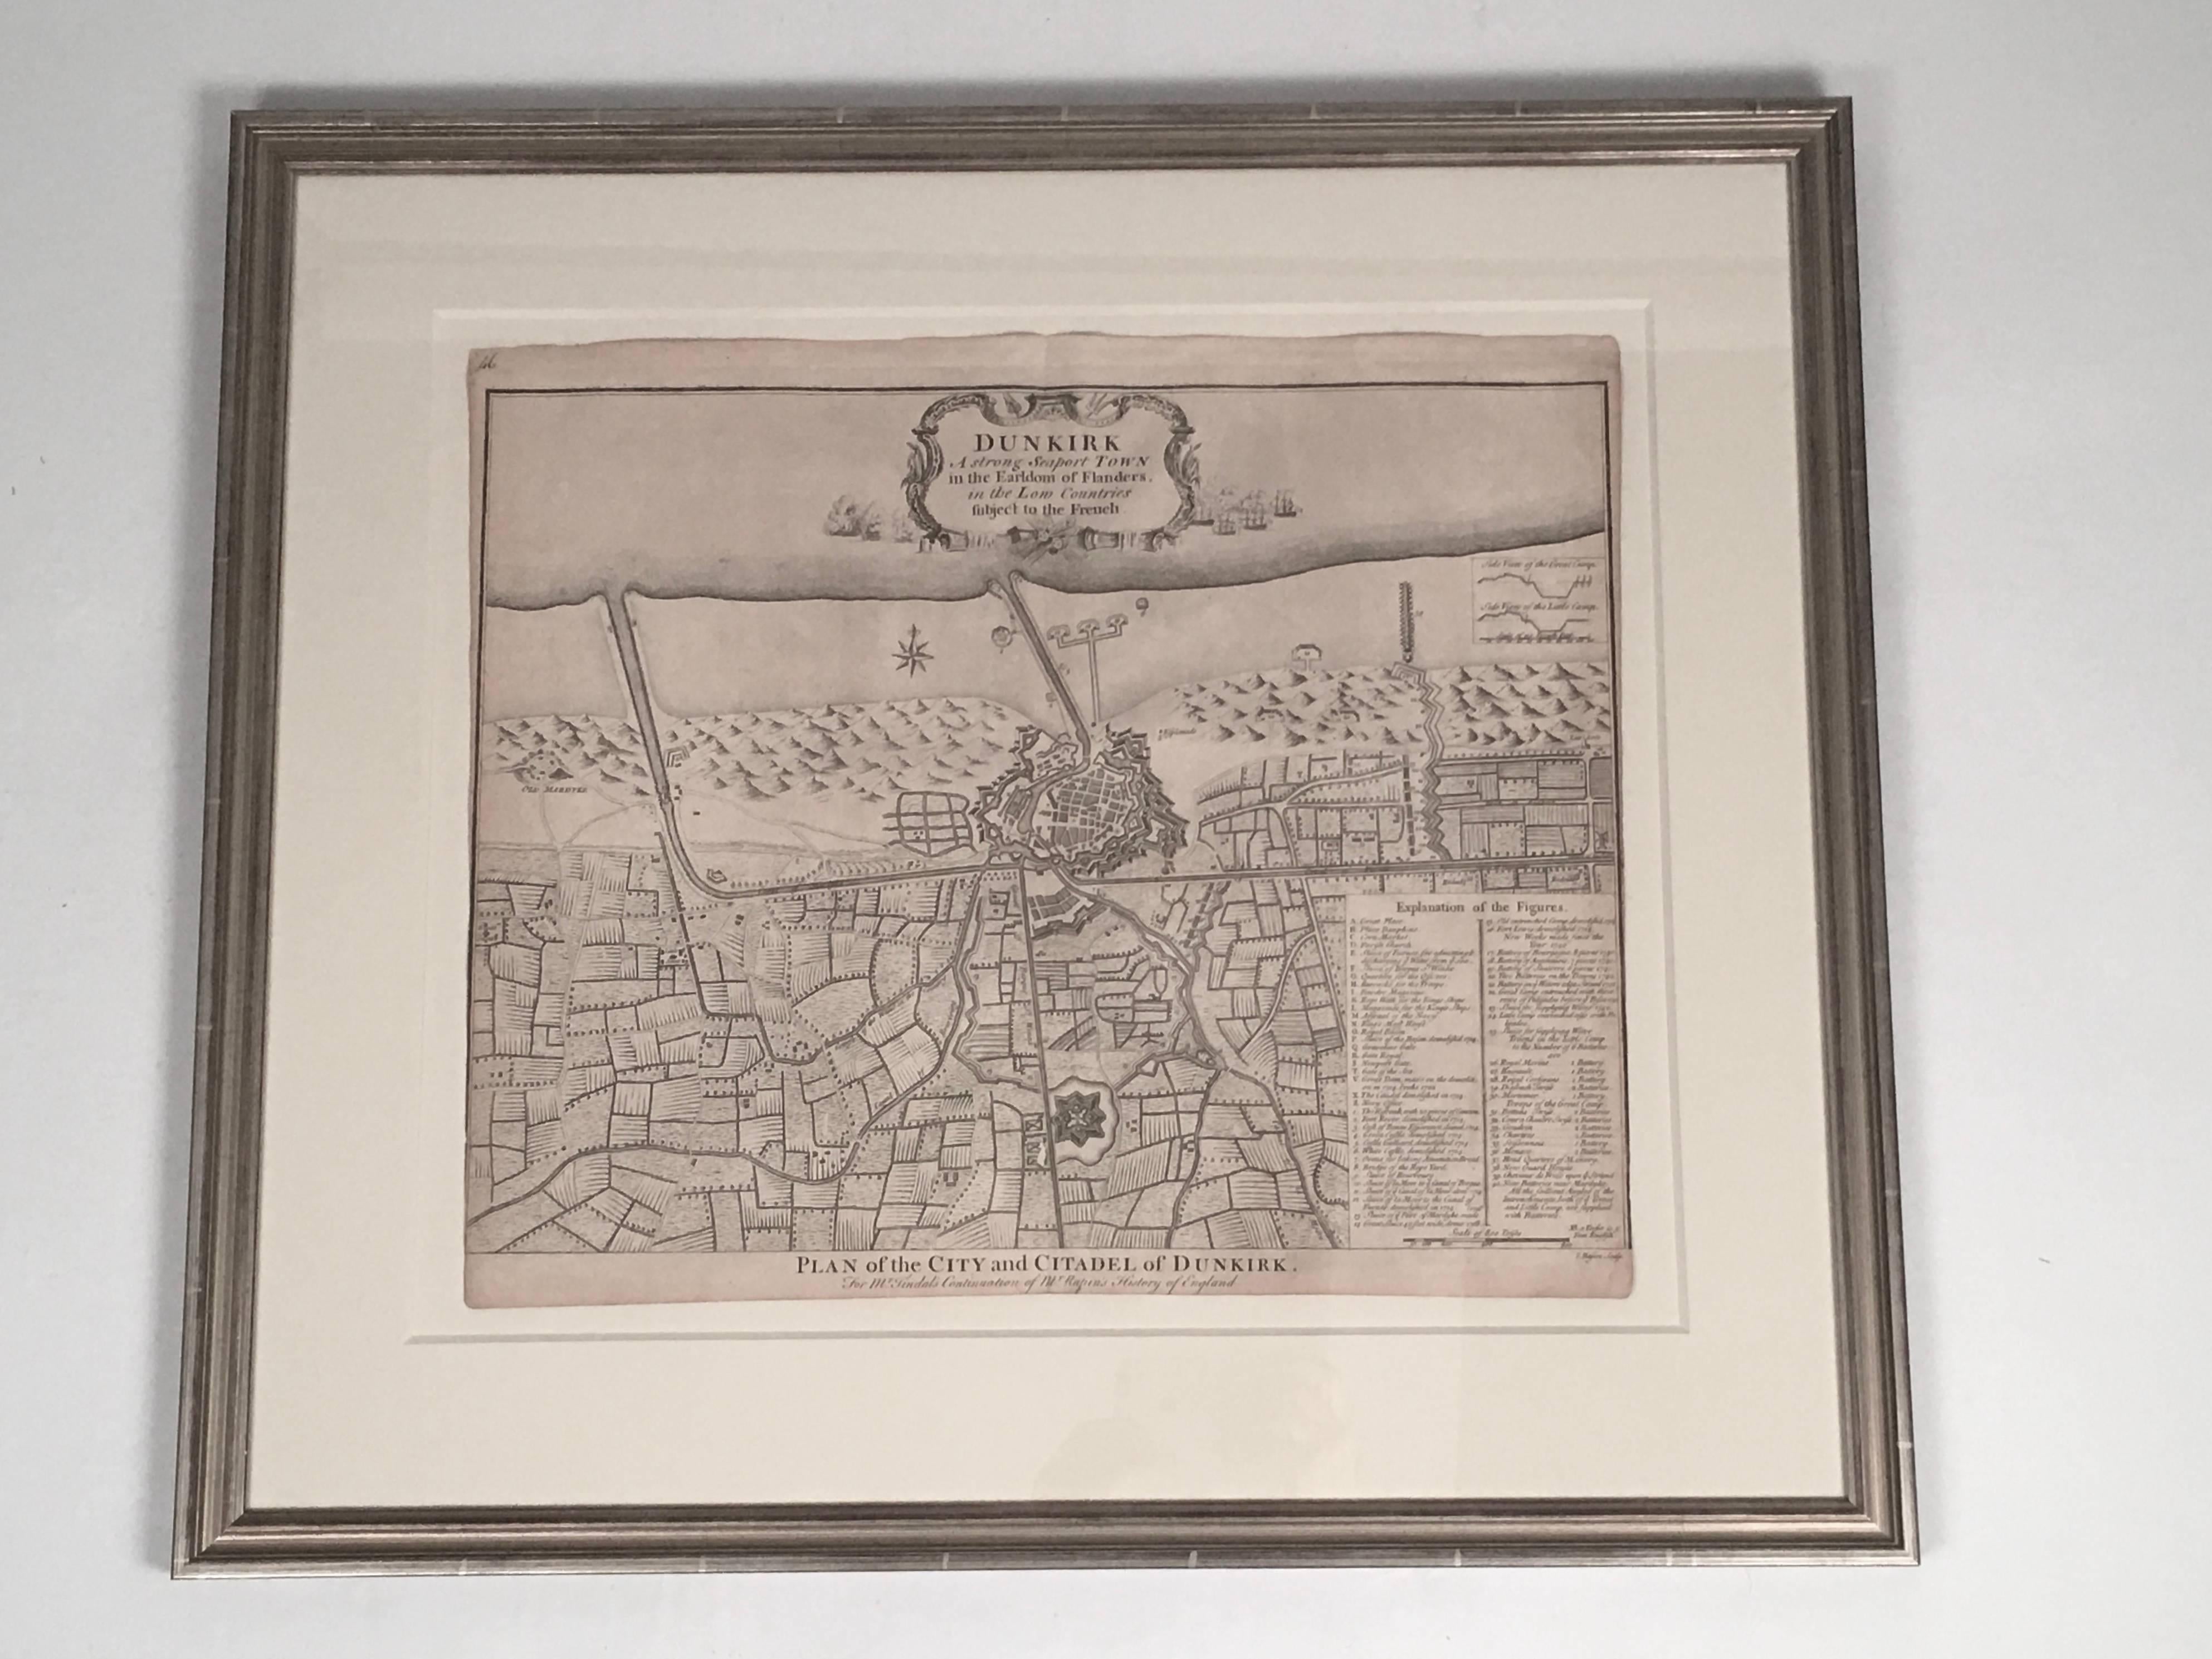 An 18th century engraving of the city and citadel of Dunkirk, France from Mr. Tindal's Continuation of Rapin's History of England, circa 1750s, new, museum quality achival framing matte floated on 8 ply acid board in a silvered wood frame with